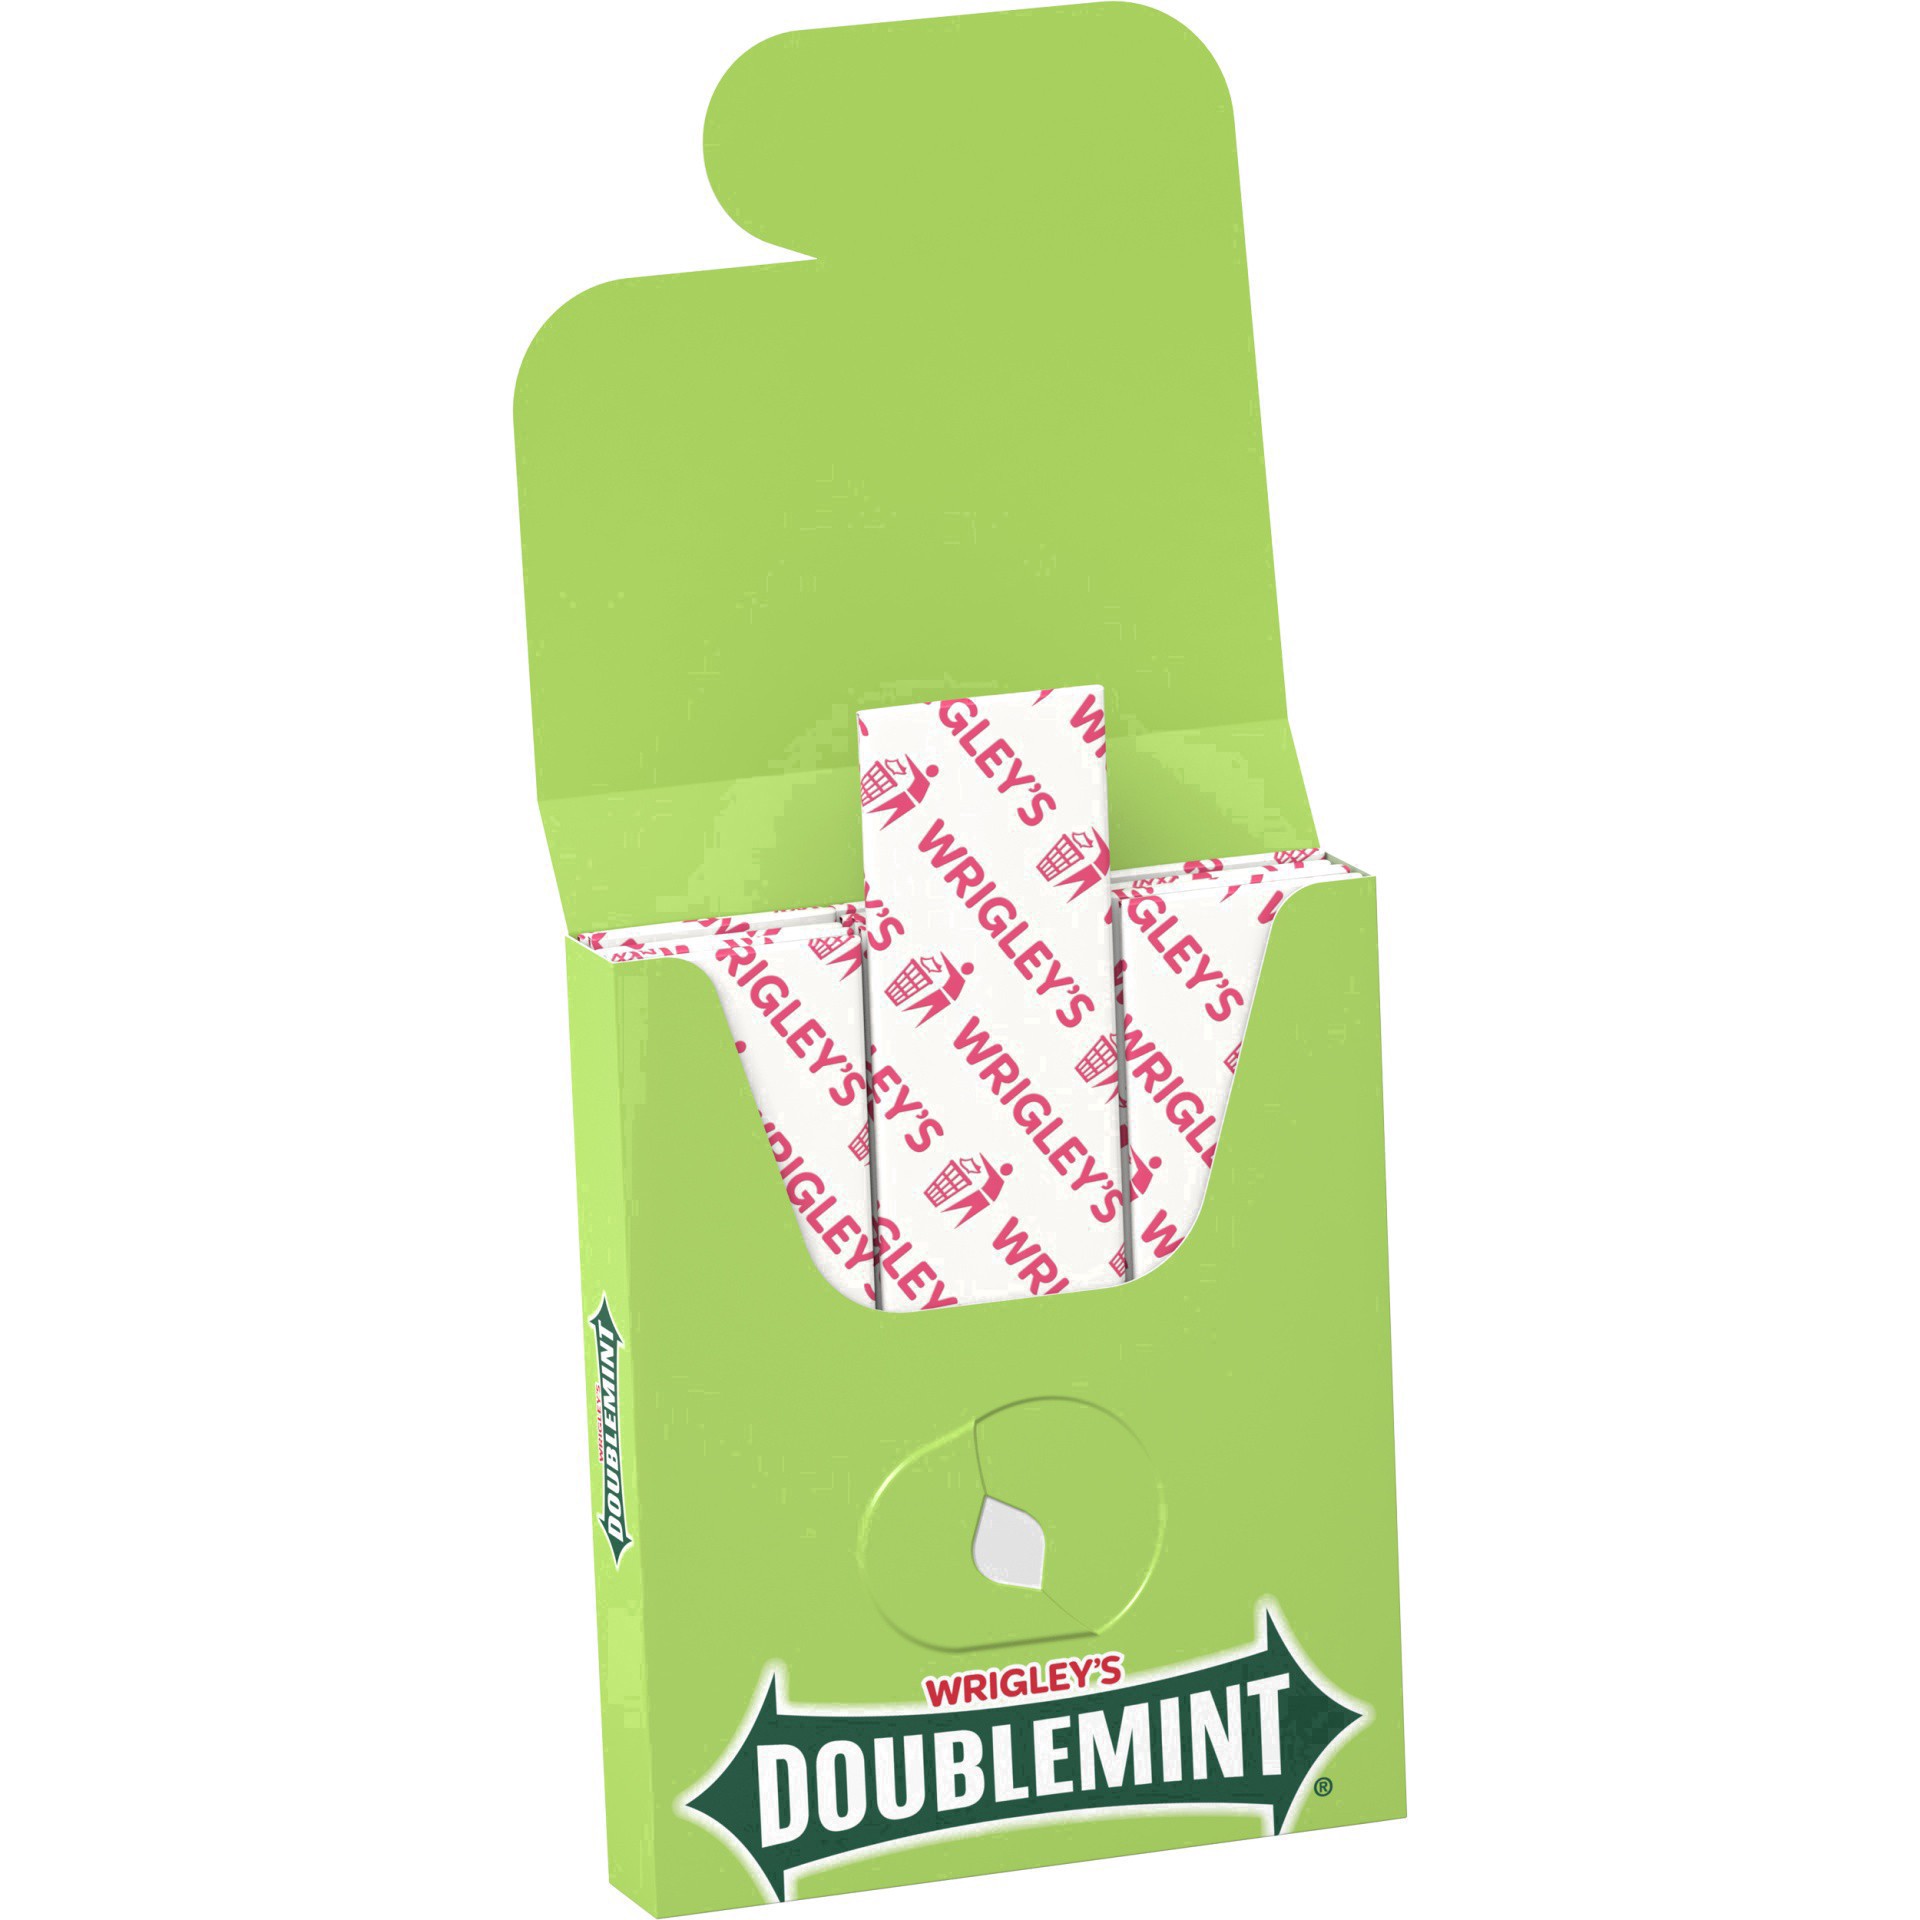 slide 86 of 134, Doublemint WRIGLEY'S DOUBLEMINT Bulk Chewing Gum, Value Pack, 15 ct (3 Pack), 45 ct